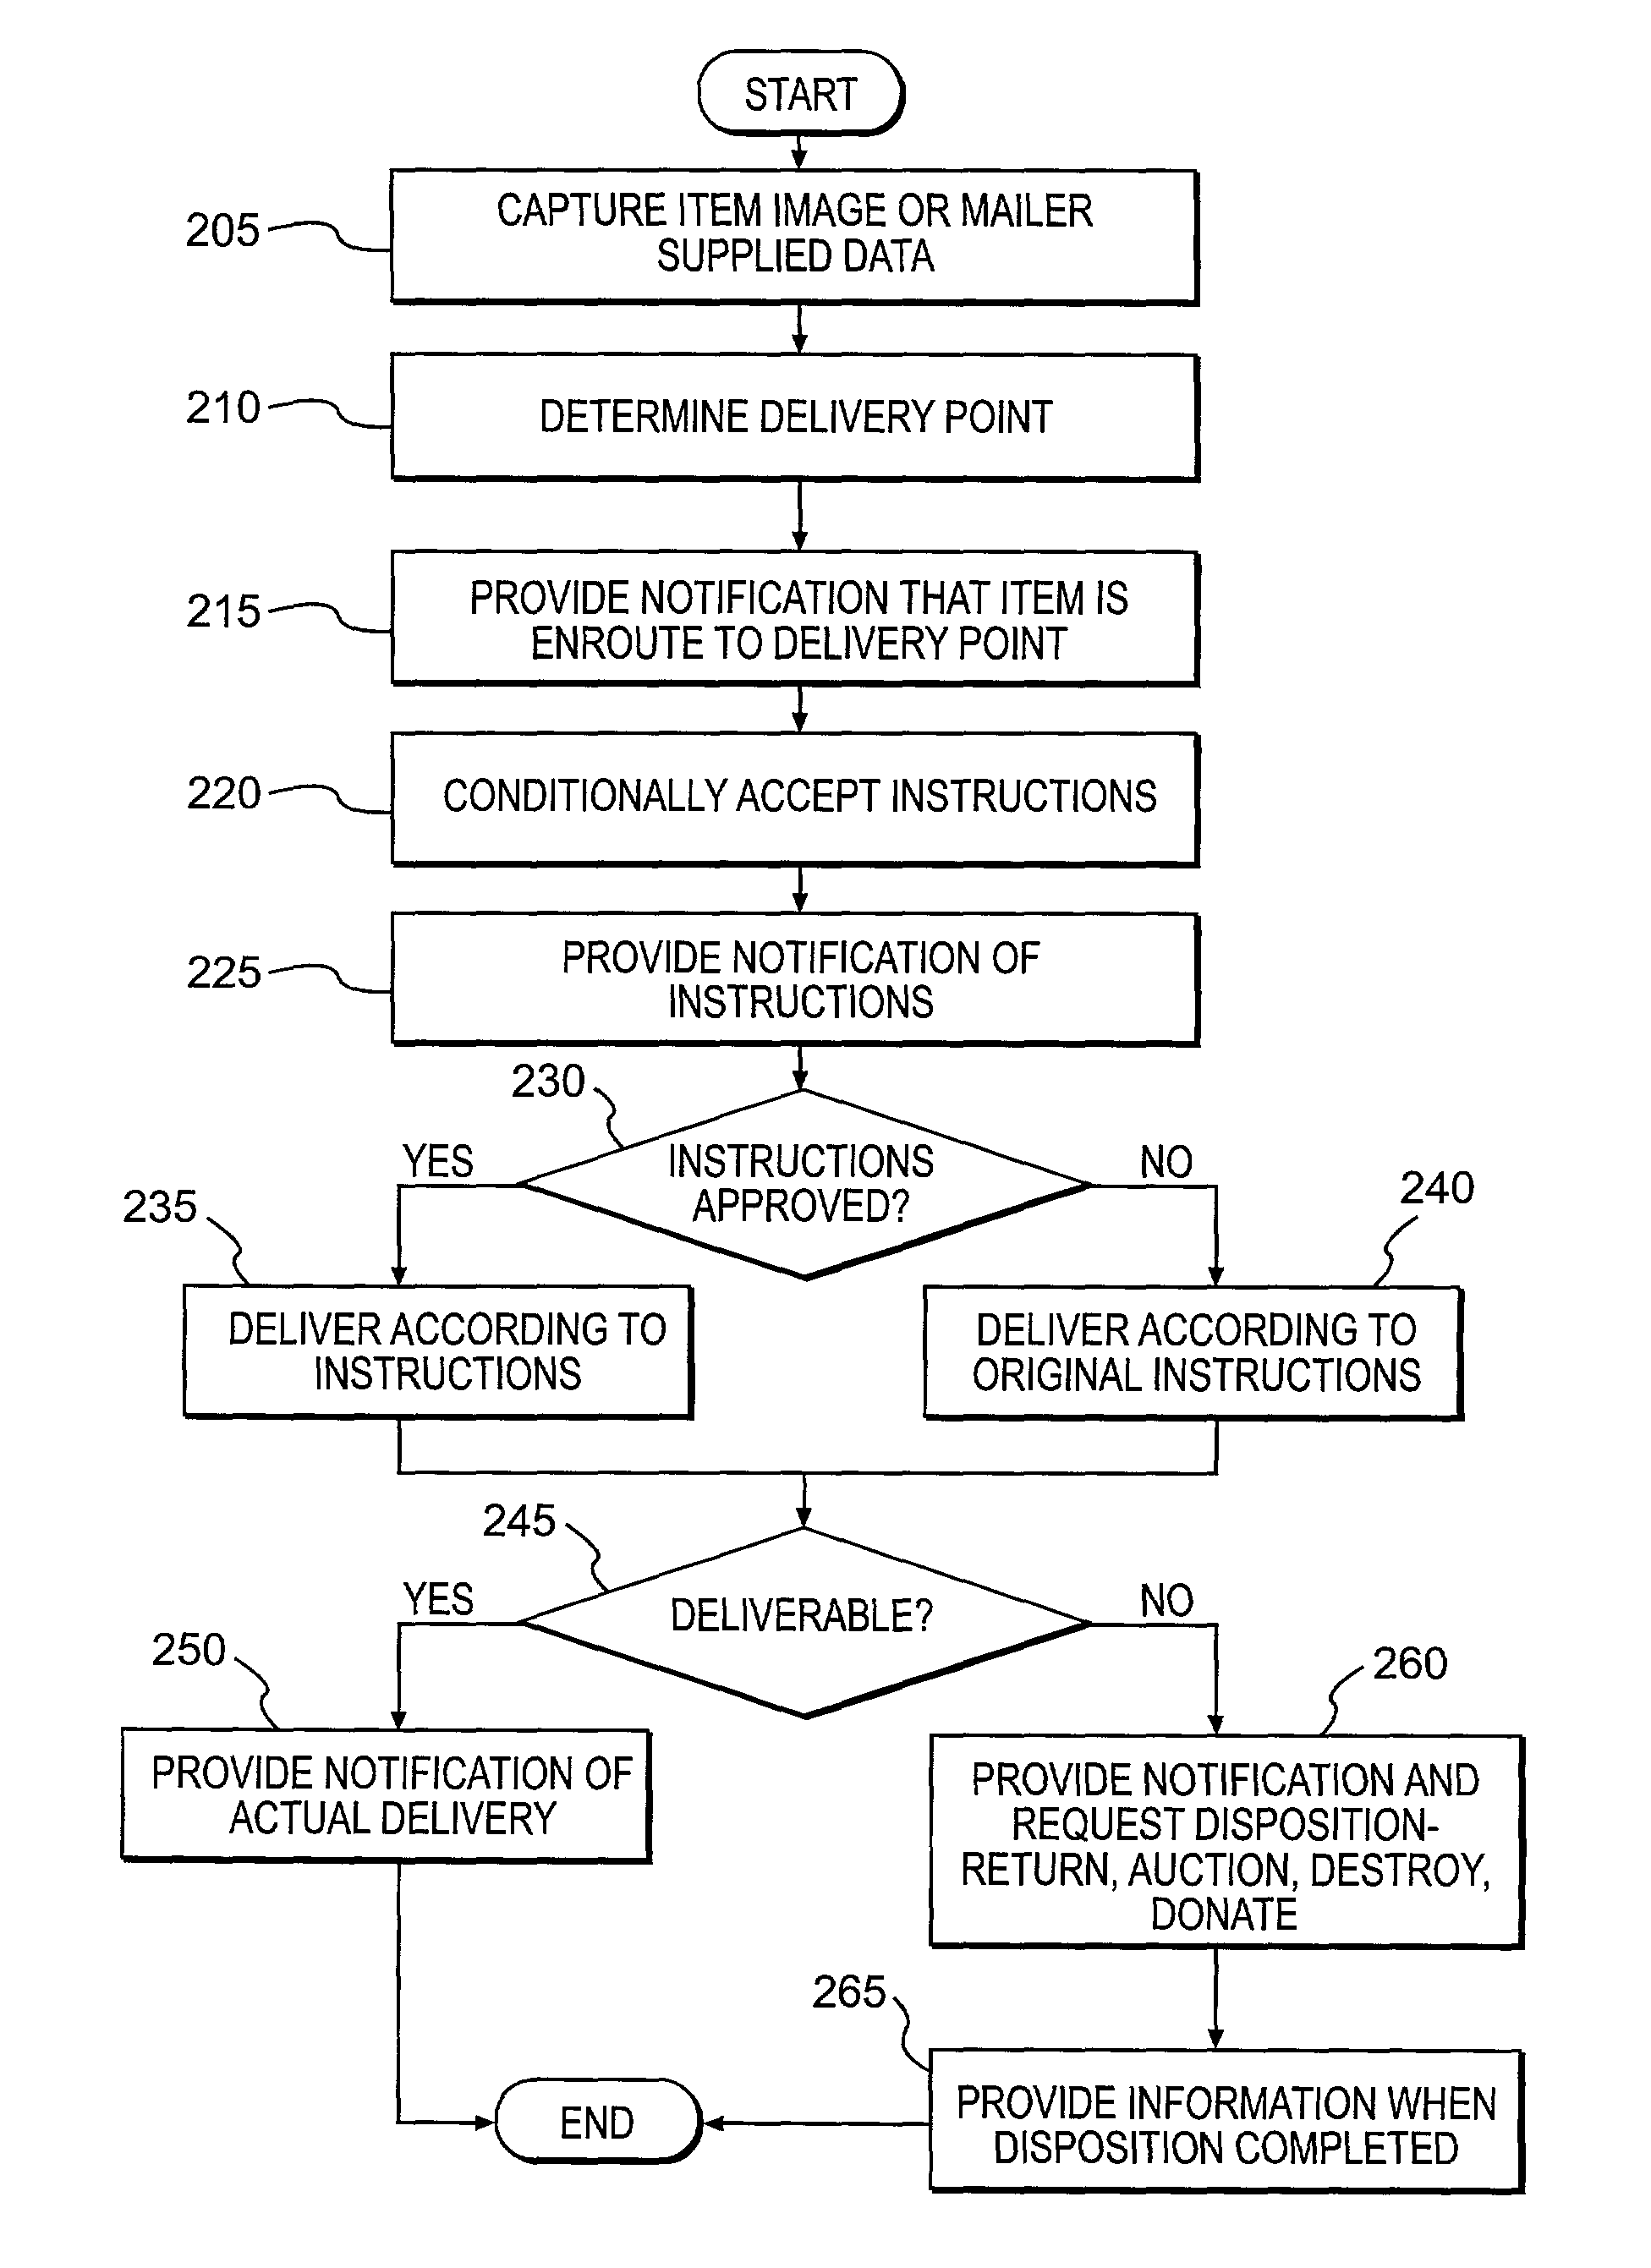 Flexible mail delivery system and method